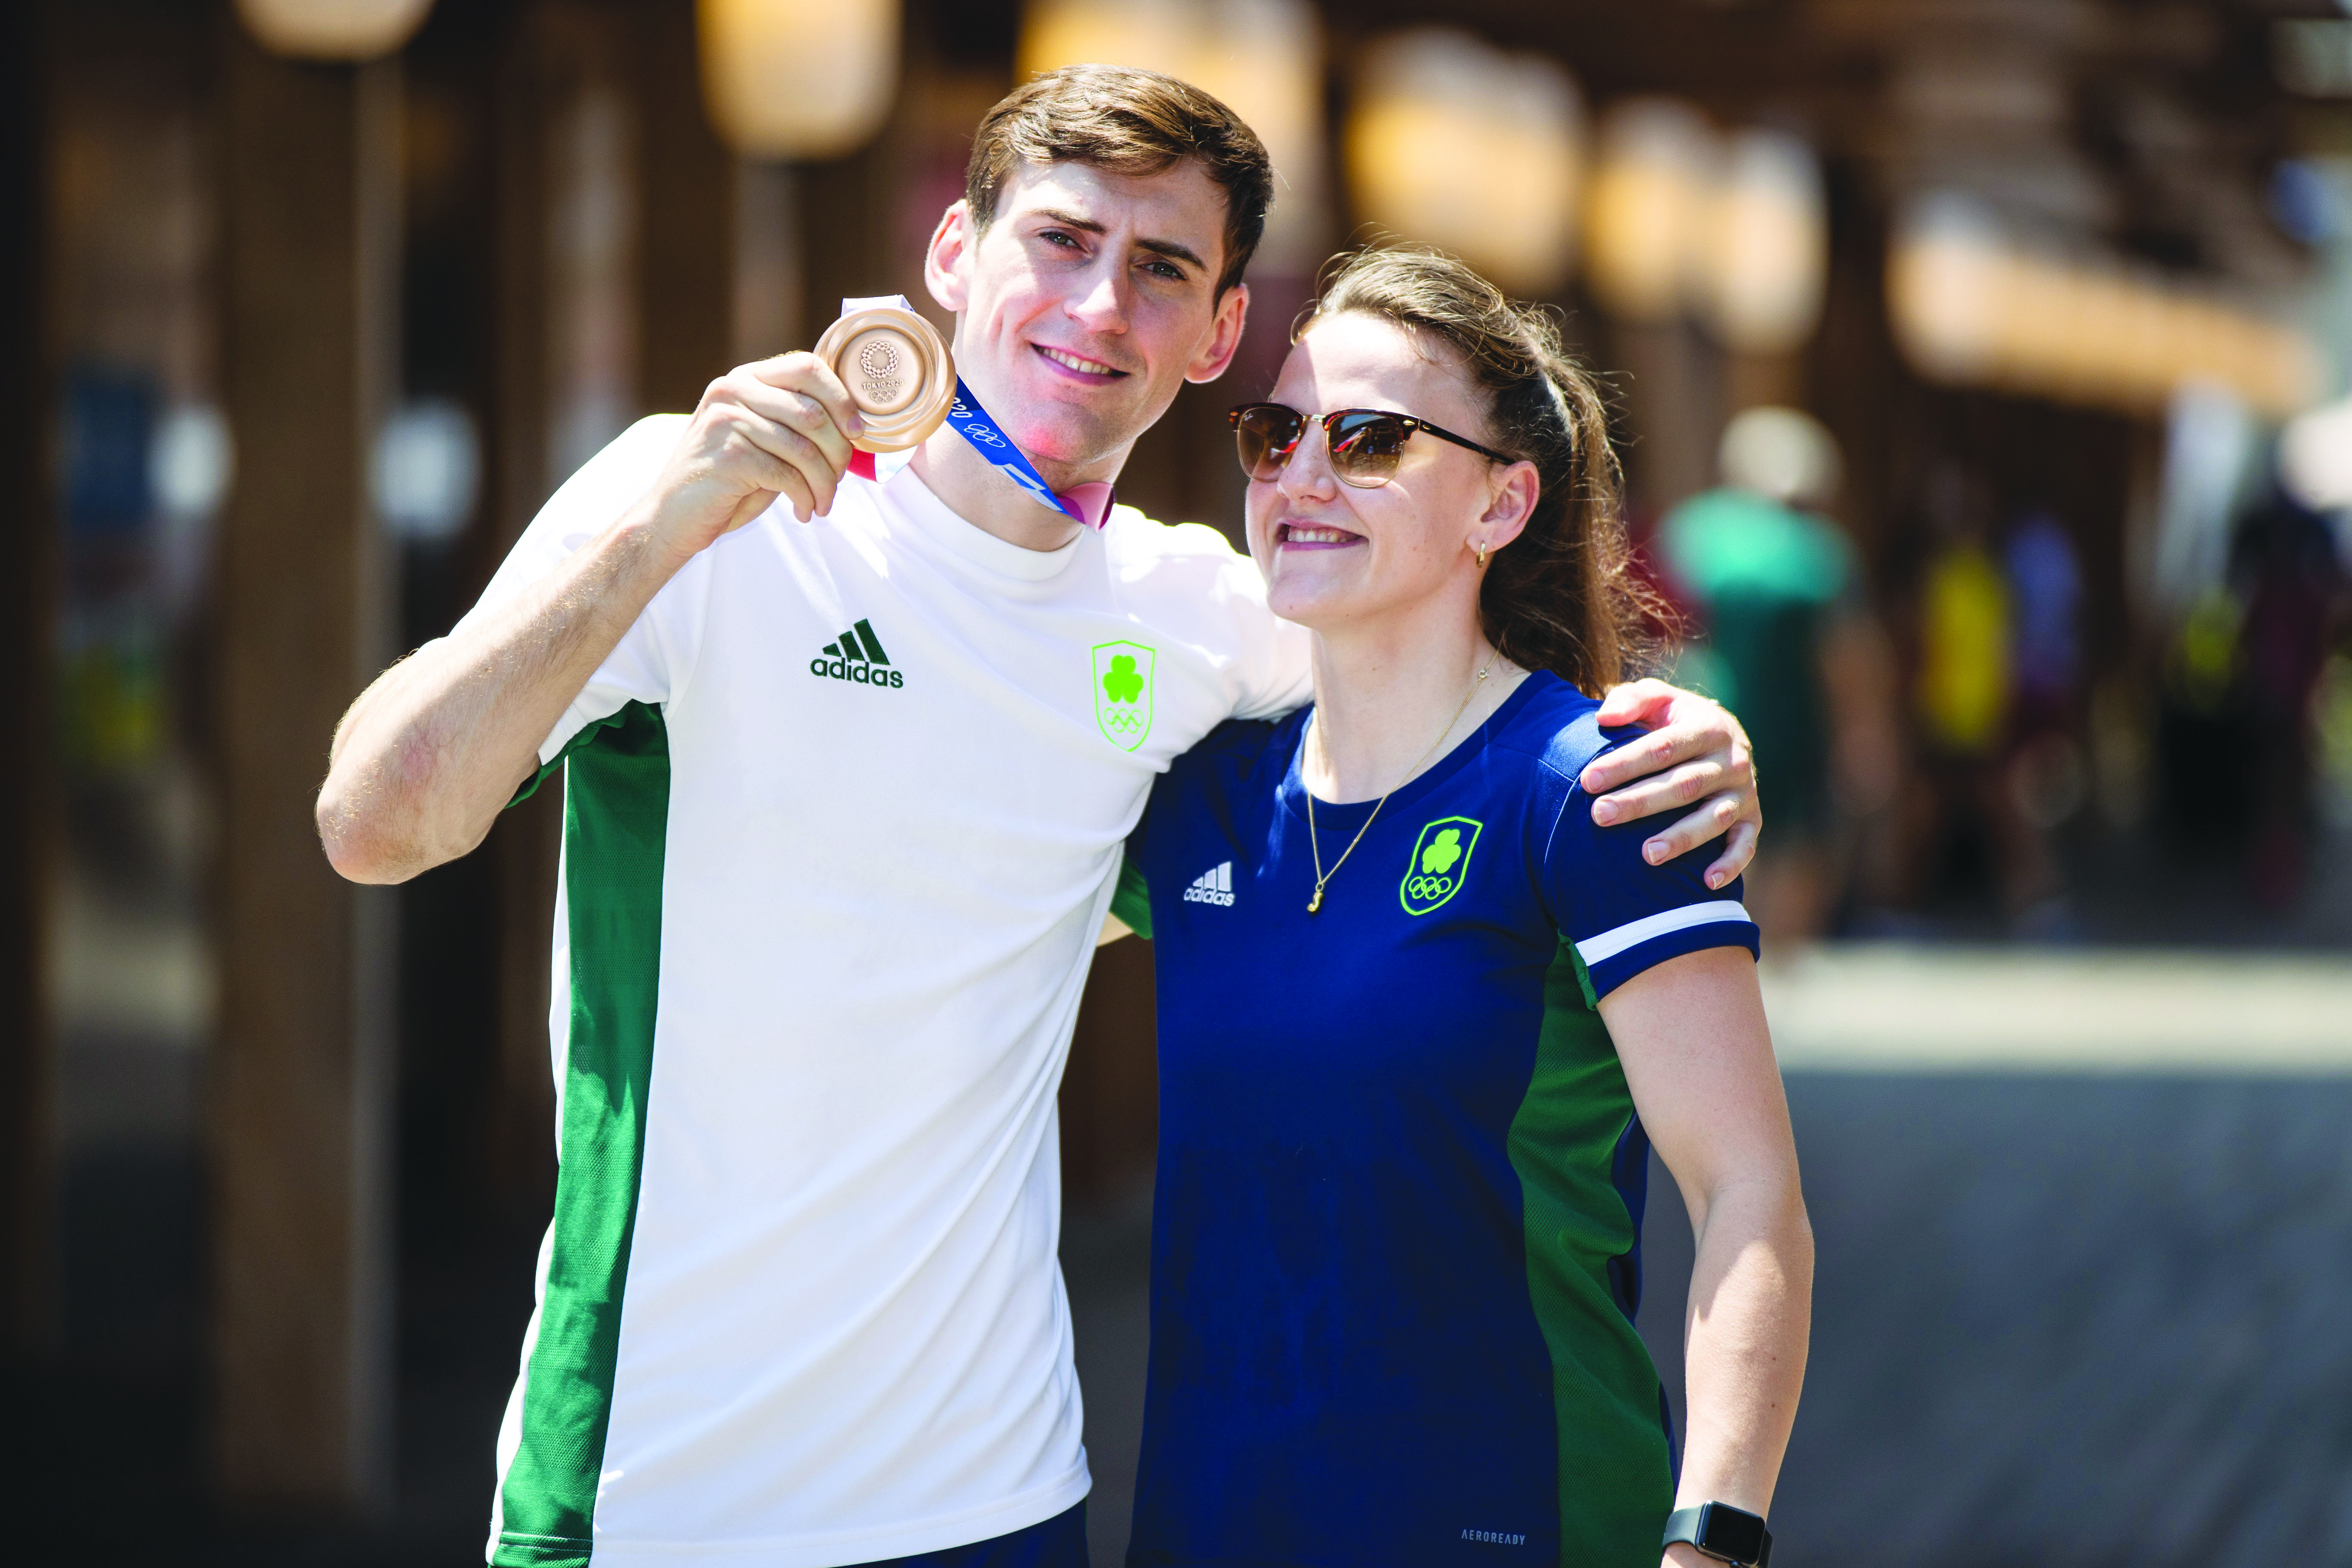 Siblings, Aidan and Michaela Walsh will hope to lead the charge at the Commonwealth Games